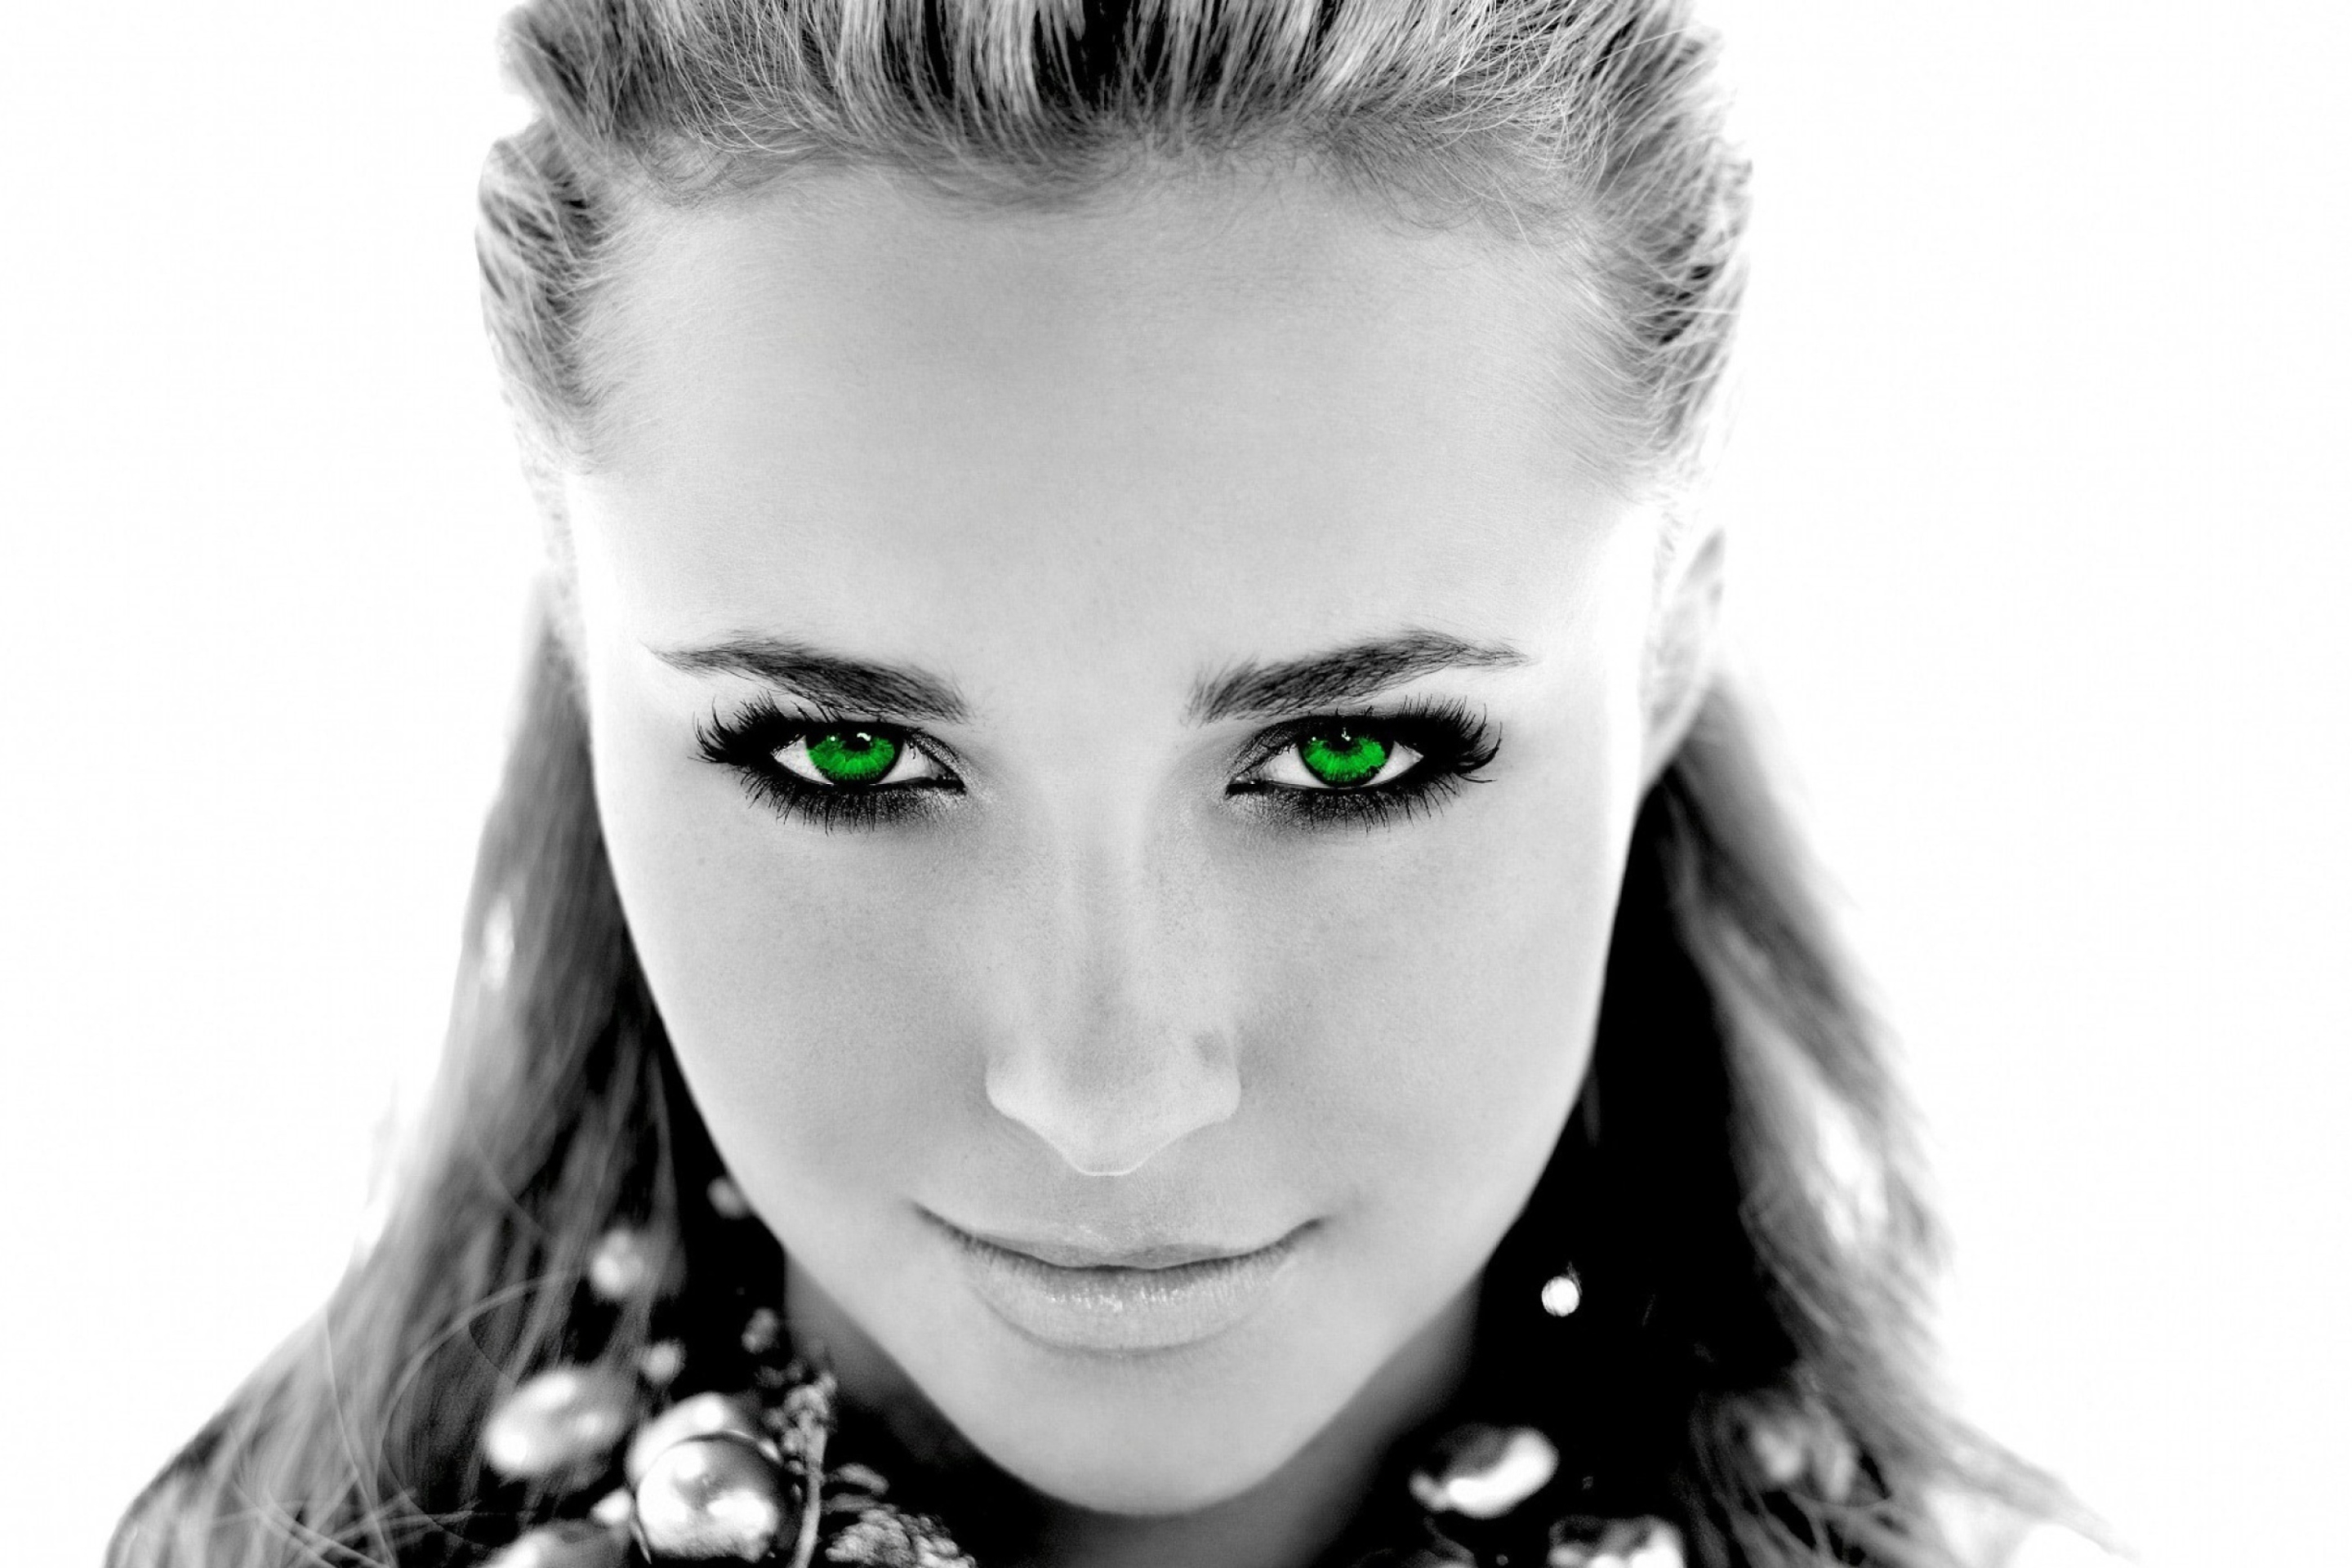 Girl With Green Eyes wallpaper 2880x1920